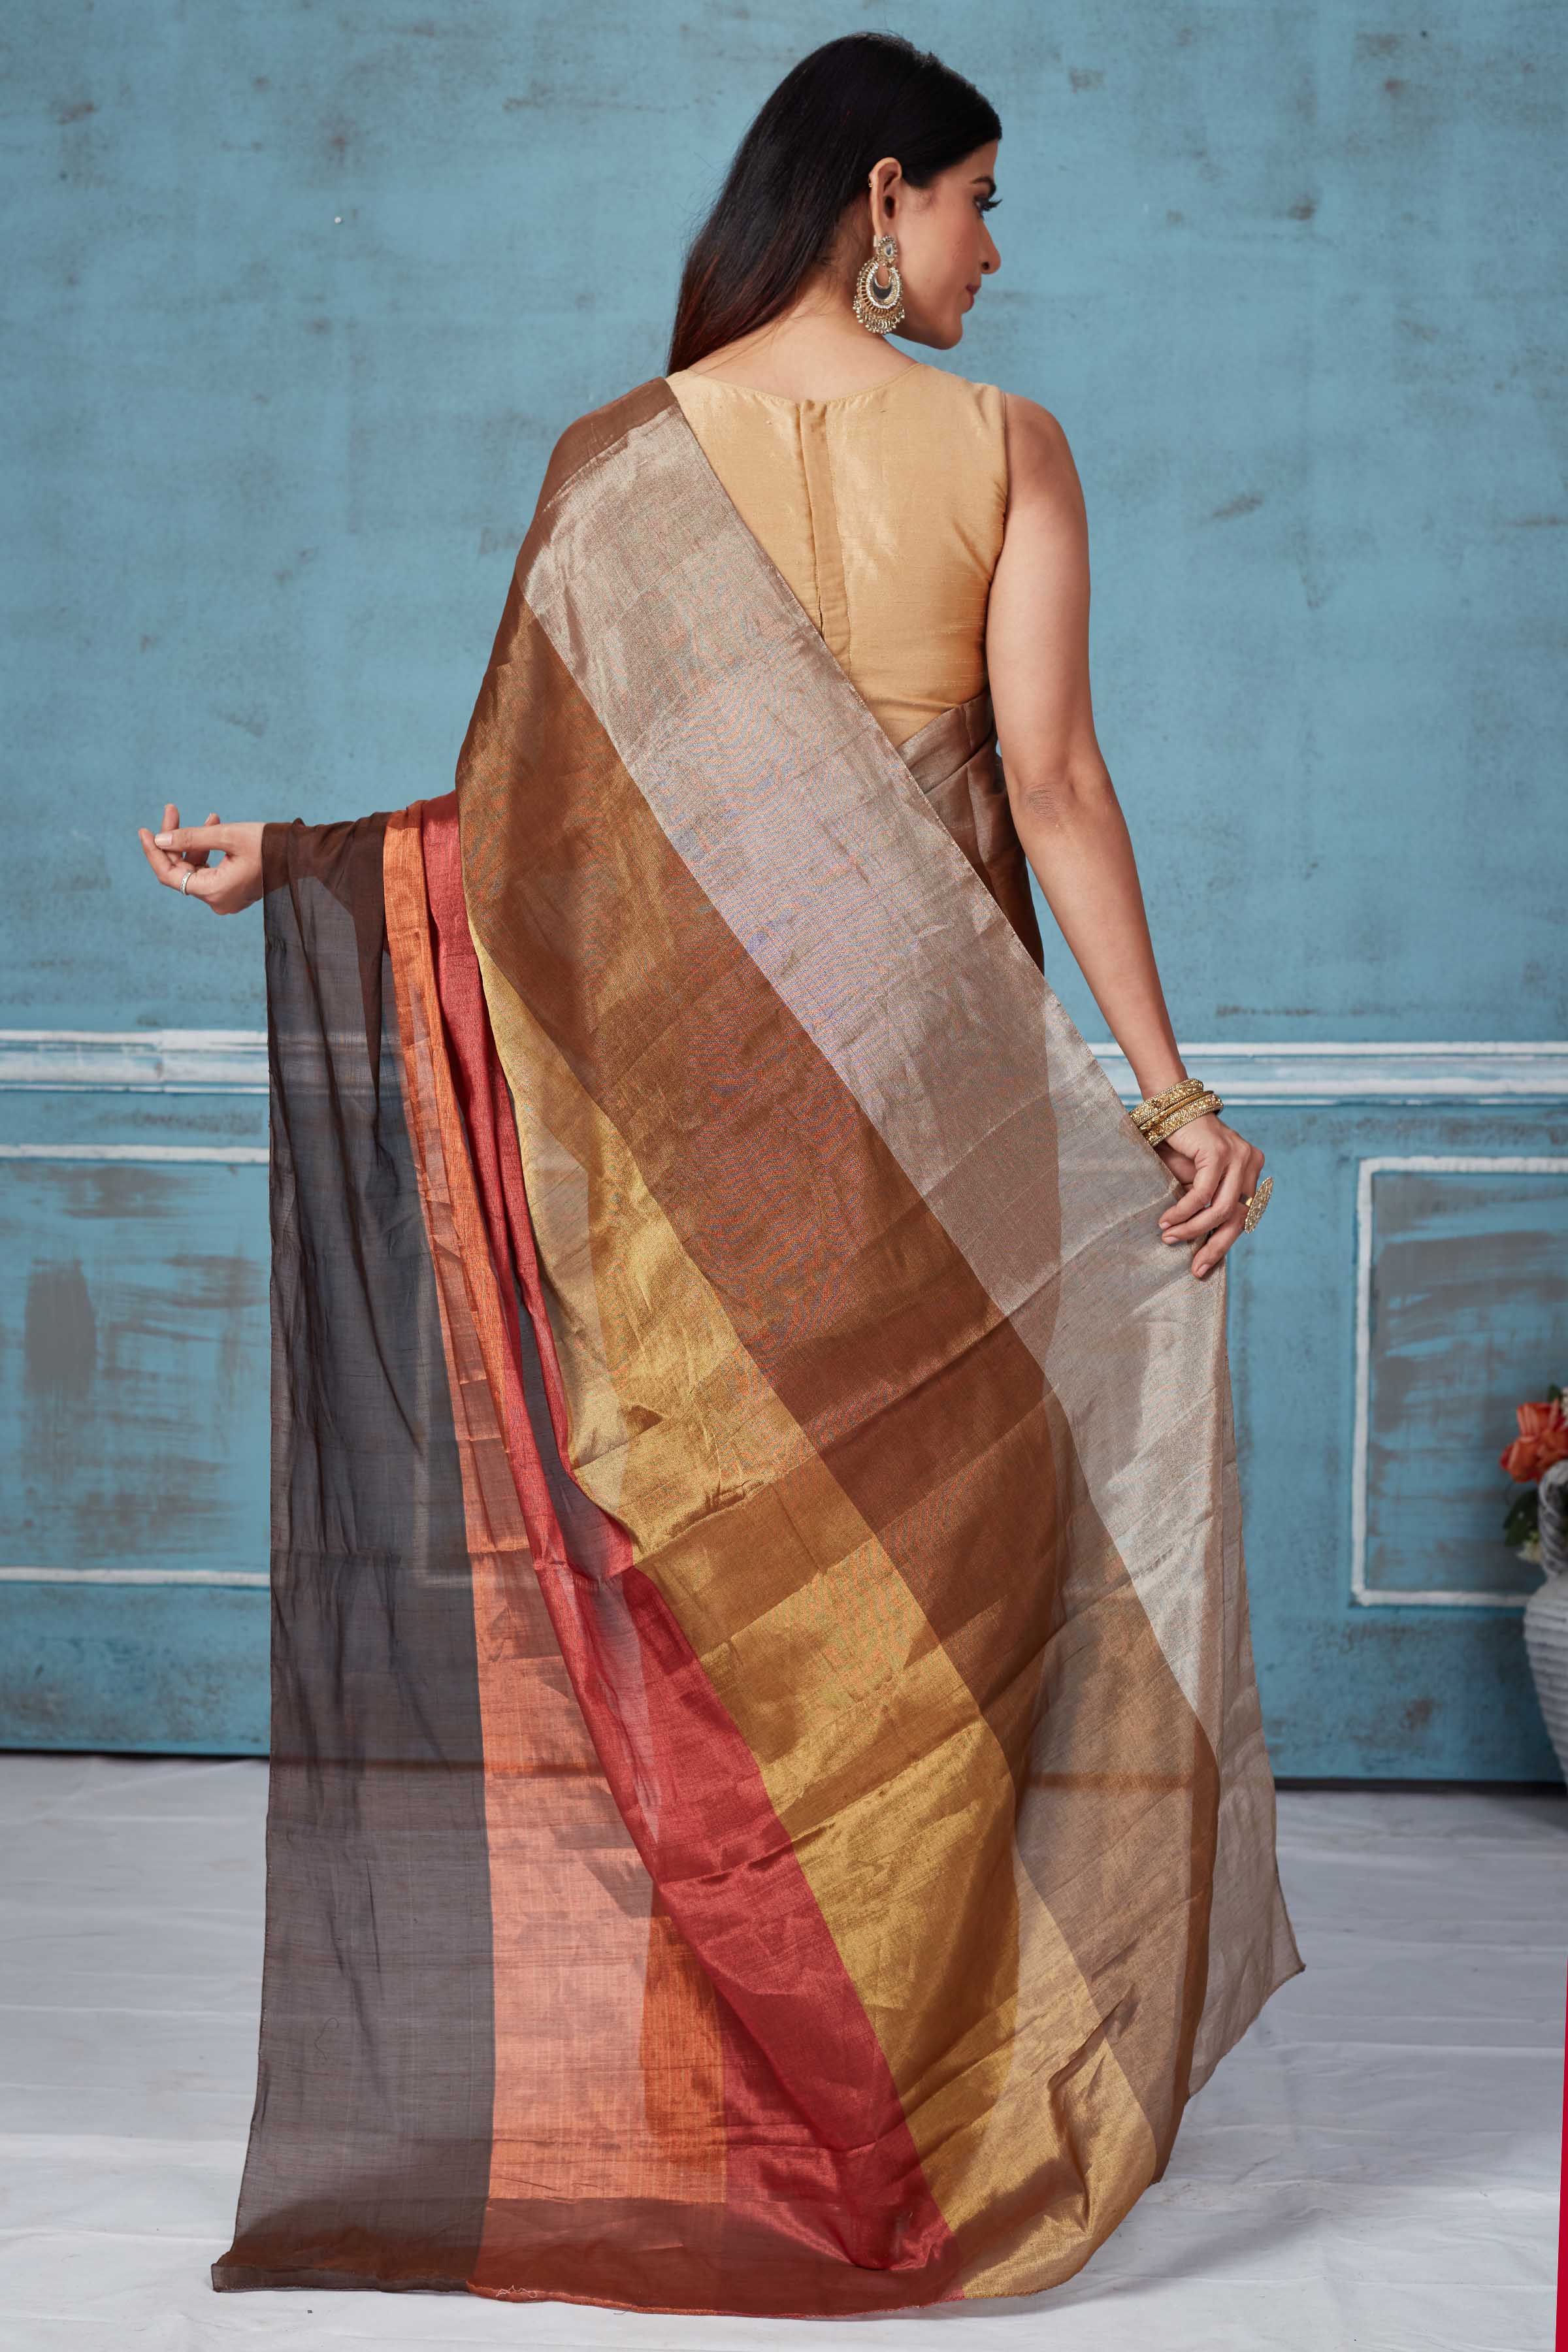 Buy beautiful earthy tones tissue silk golden zari sari online in USA. Look your best on festive occasions in latest designer saris, pure silk saris, Kanchipuram silk sarees, handwoven sarees, tussar silk sarees, embroidered sarees from Pure Elegance Indian fashion store in USA.-back